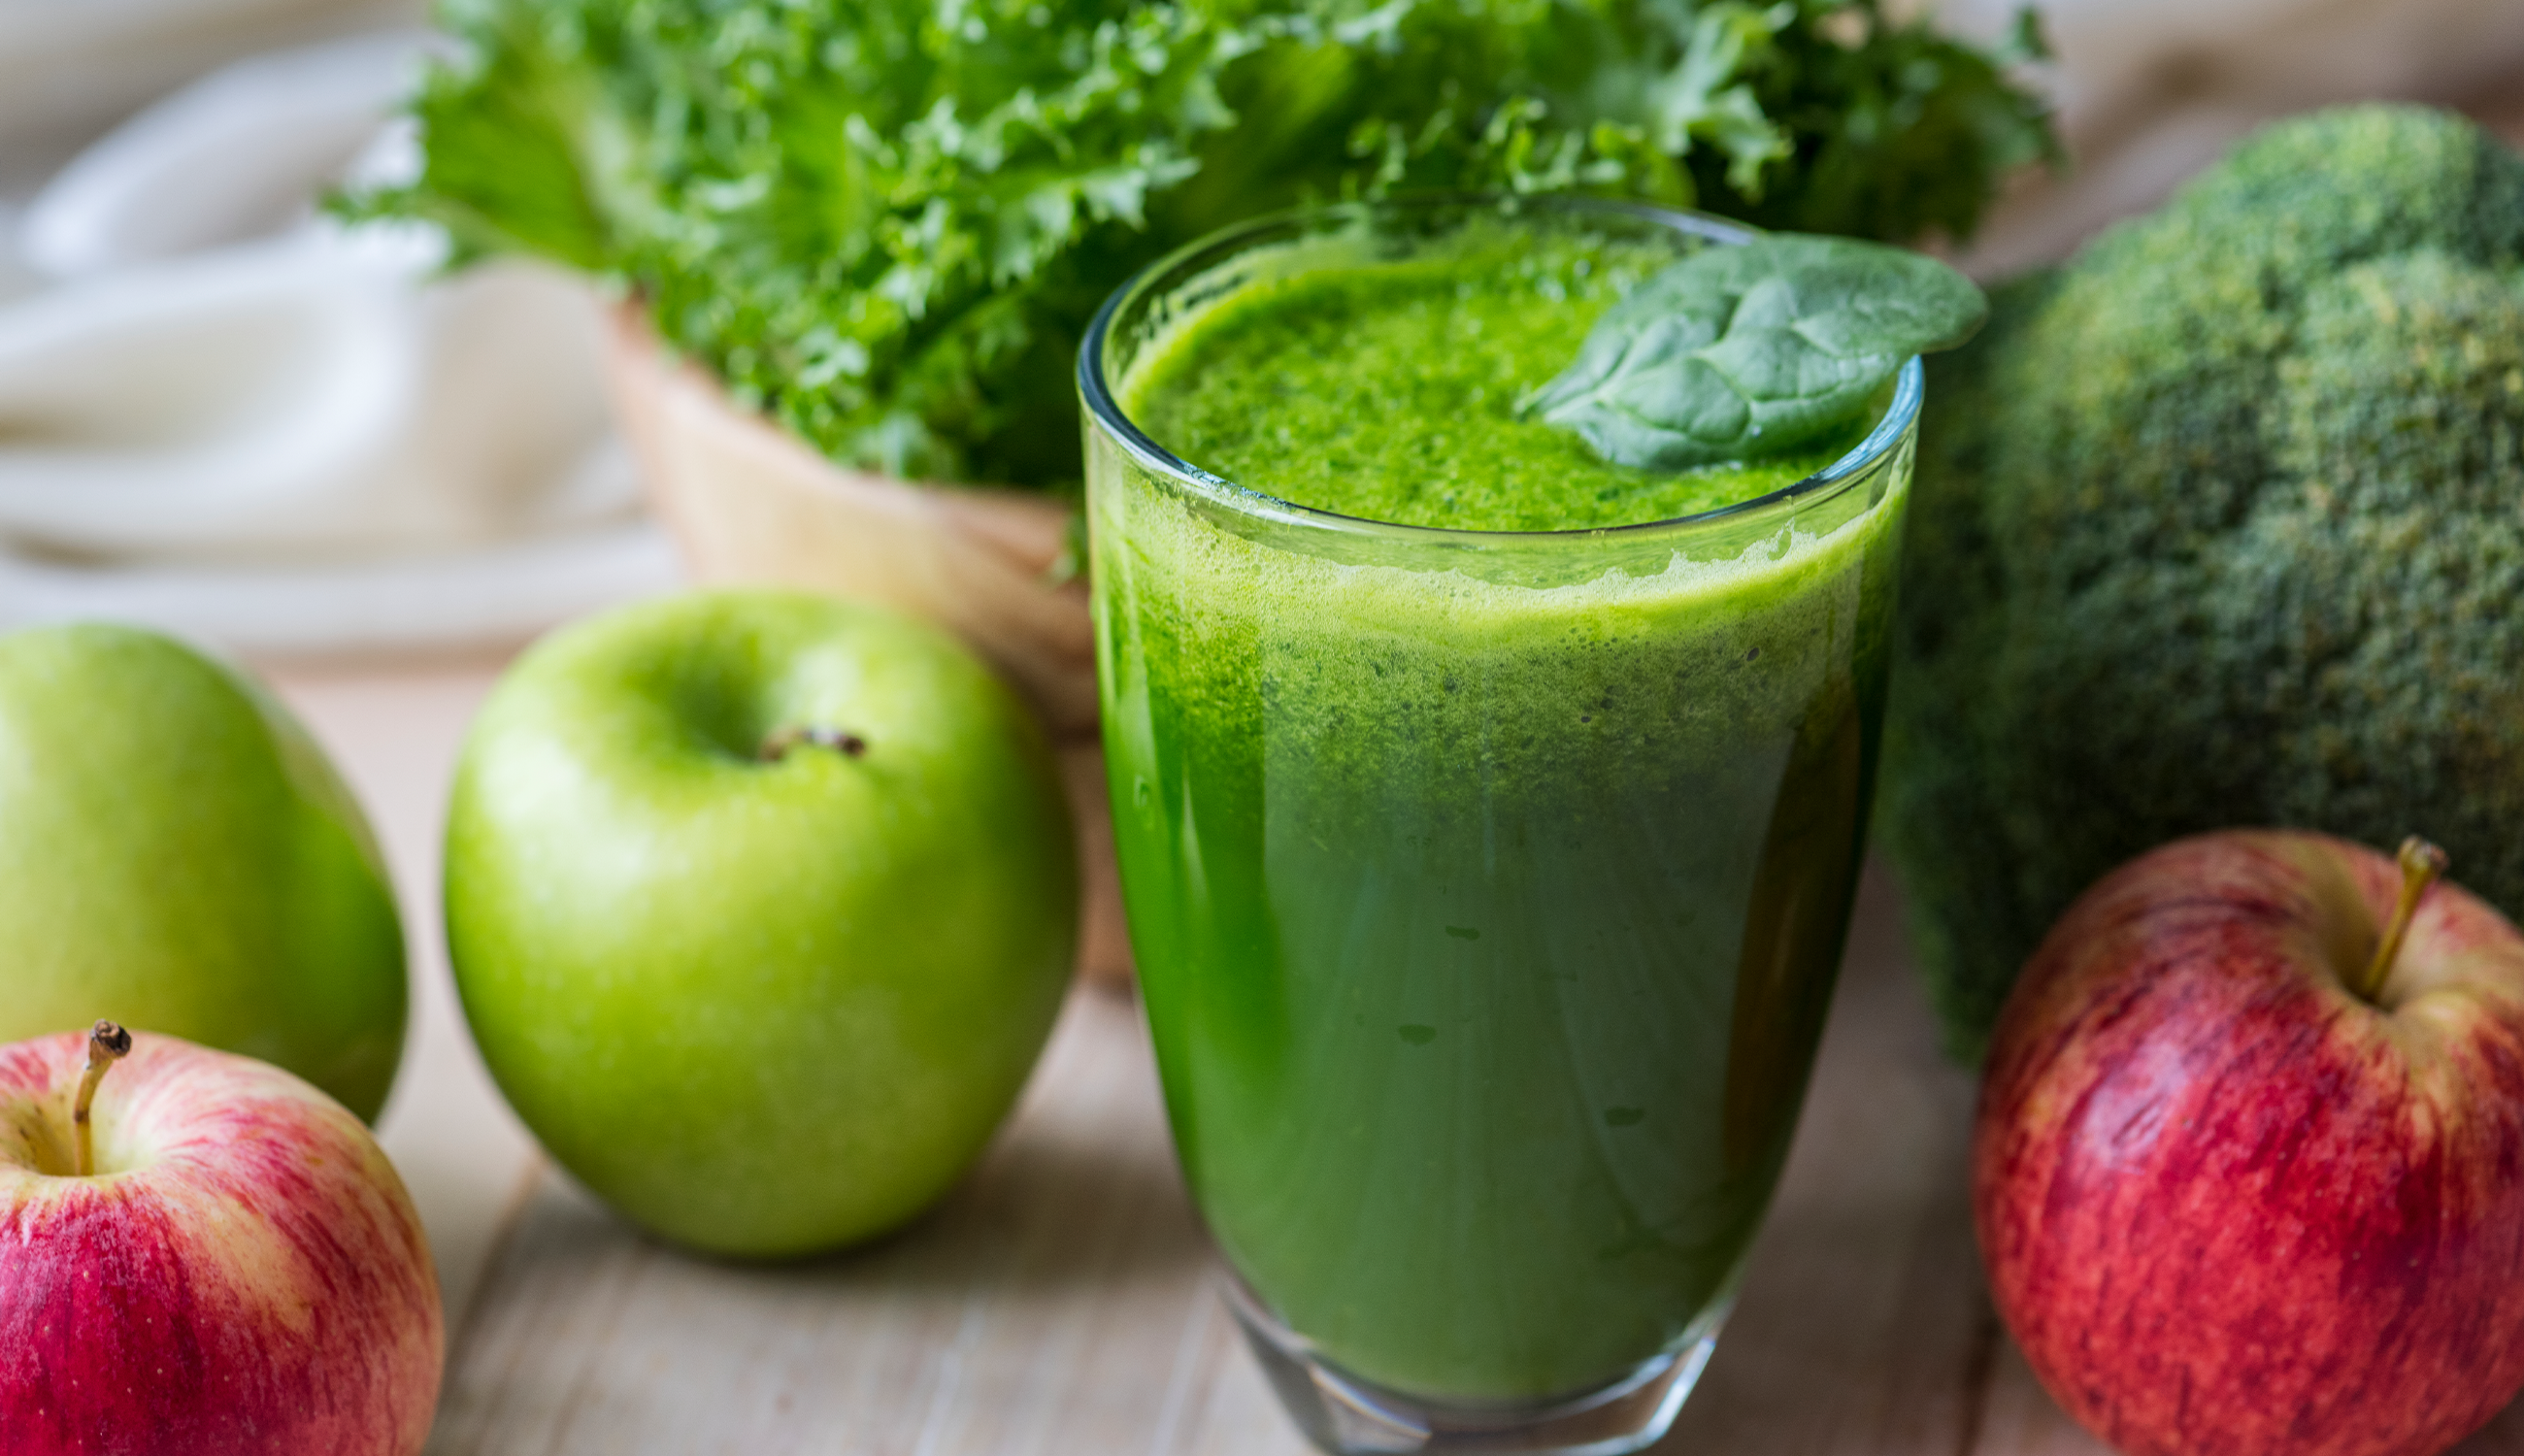 Reasons To Drink Greens More Often